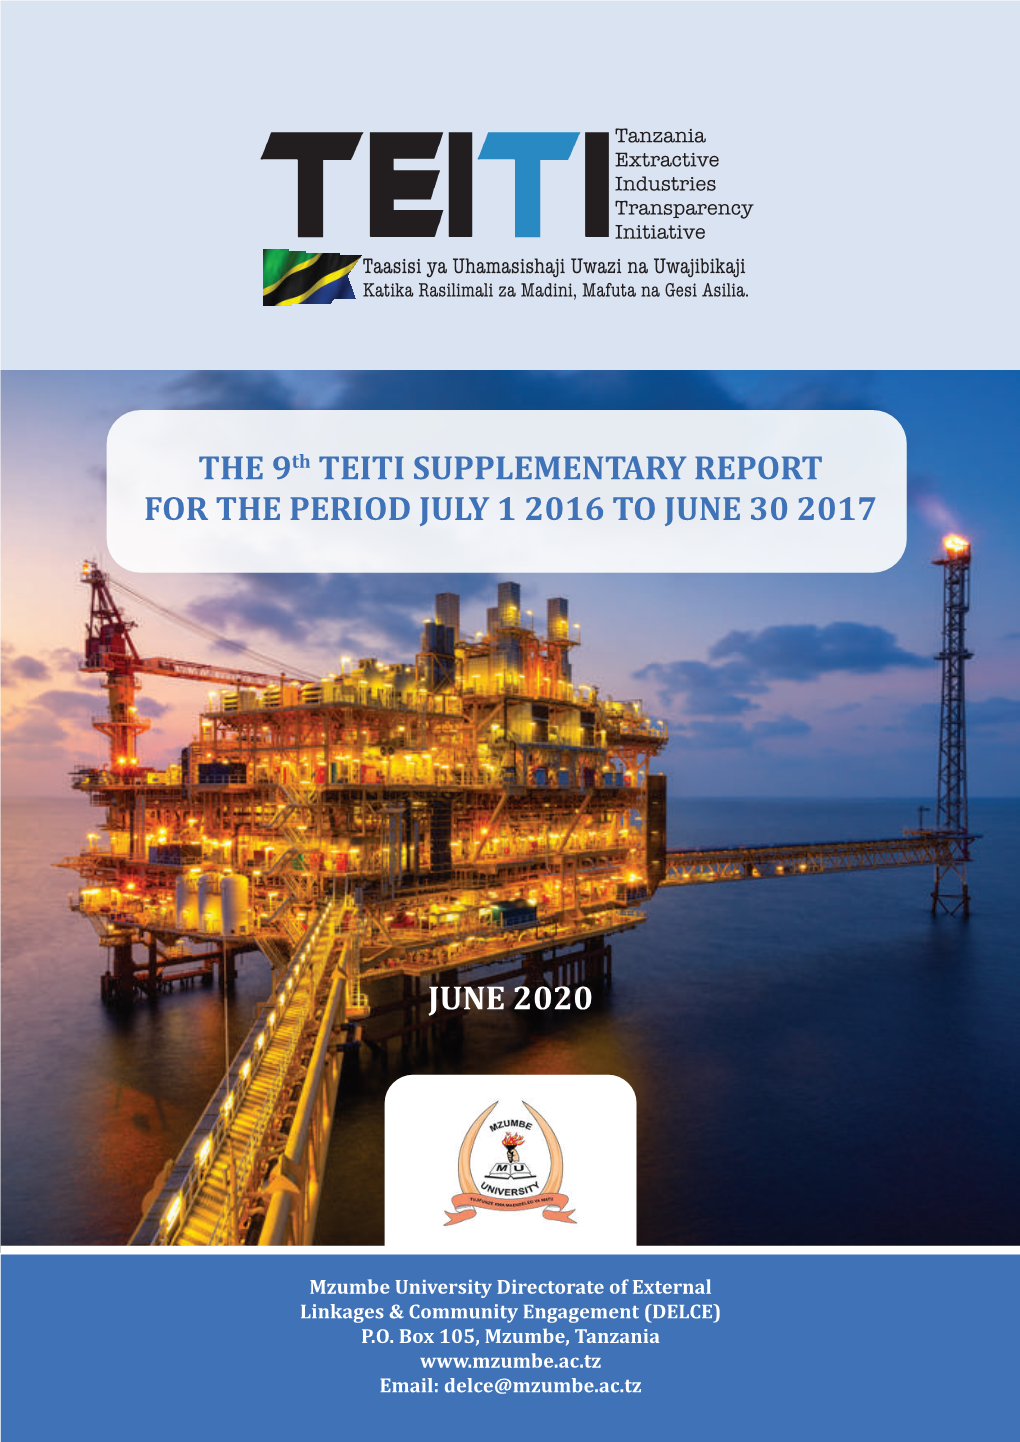 THE 9Th TEITI SUPPLEMENTARY REPORT for the PERIOD JULY 1 2016 to JUNE 30 2017